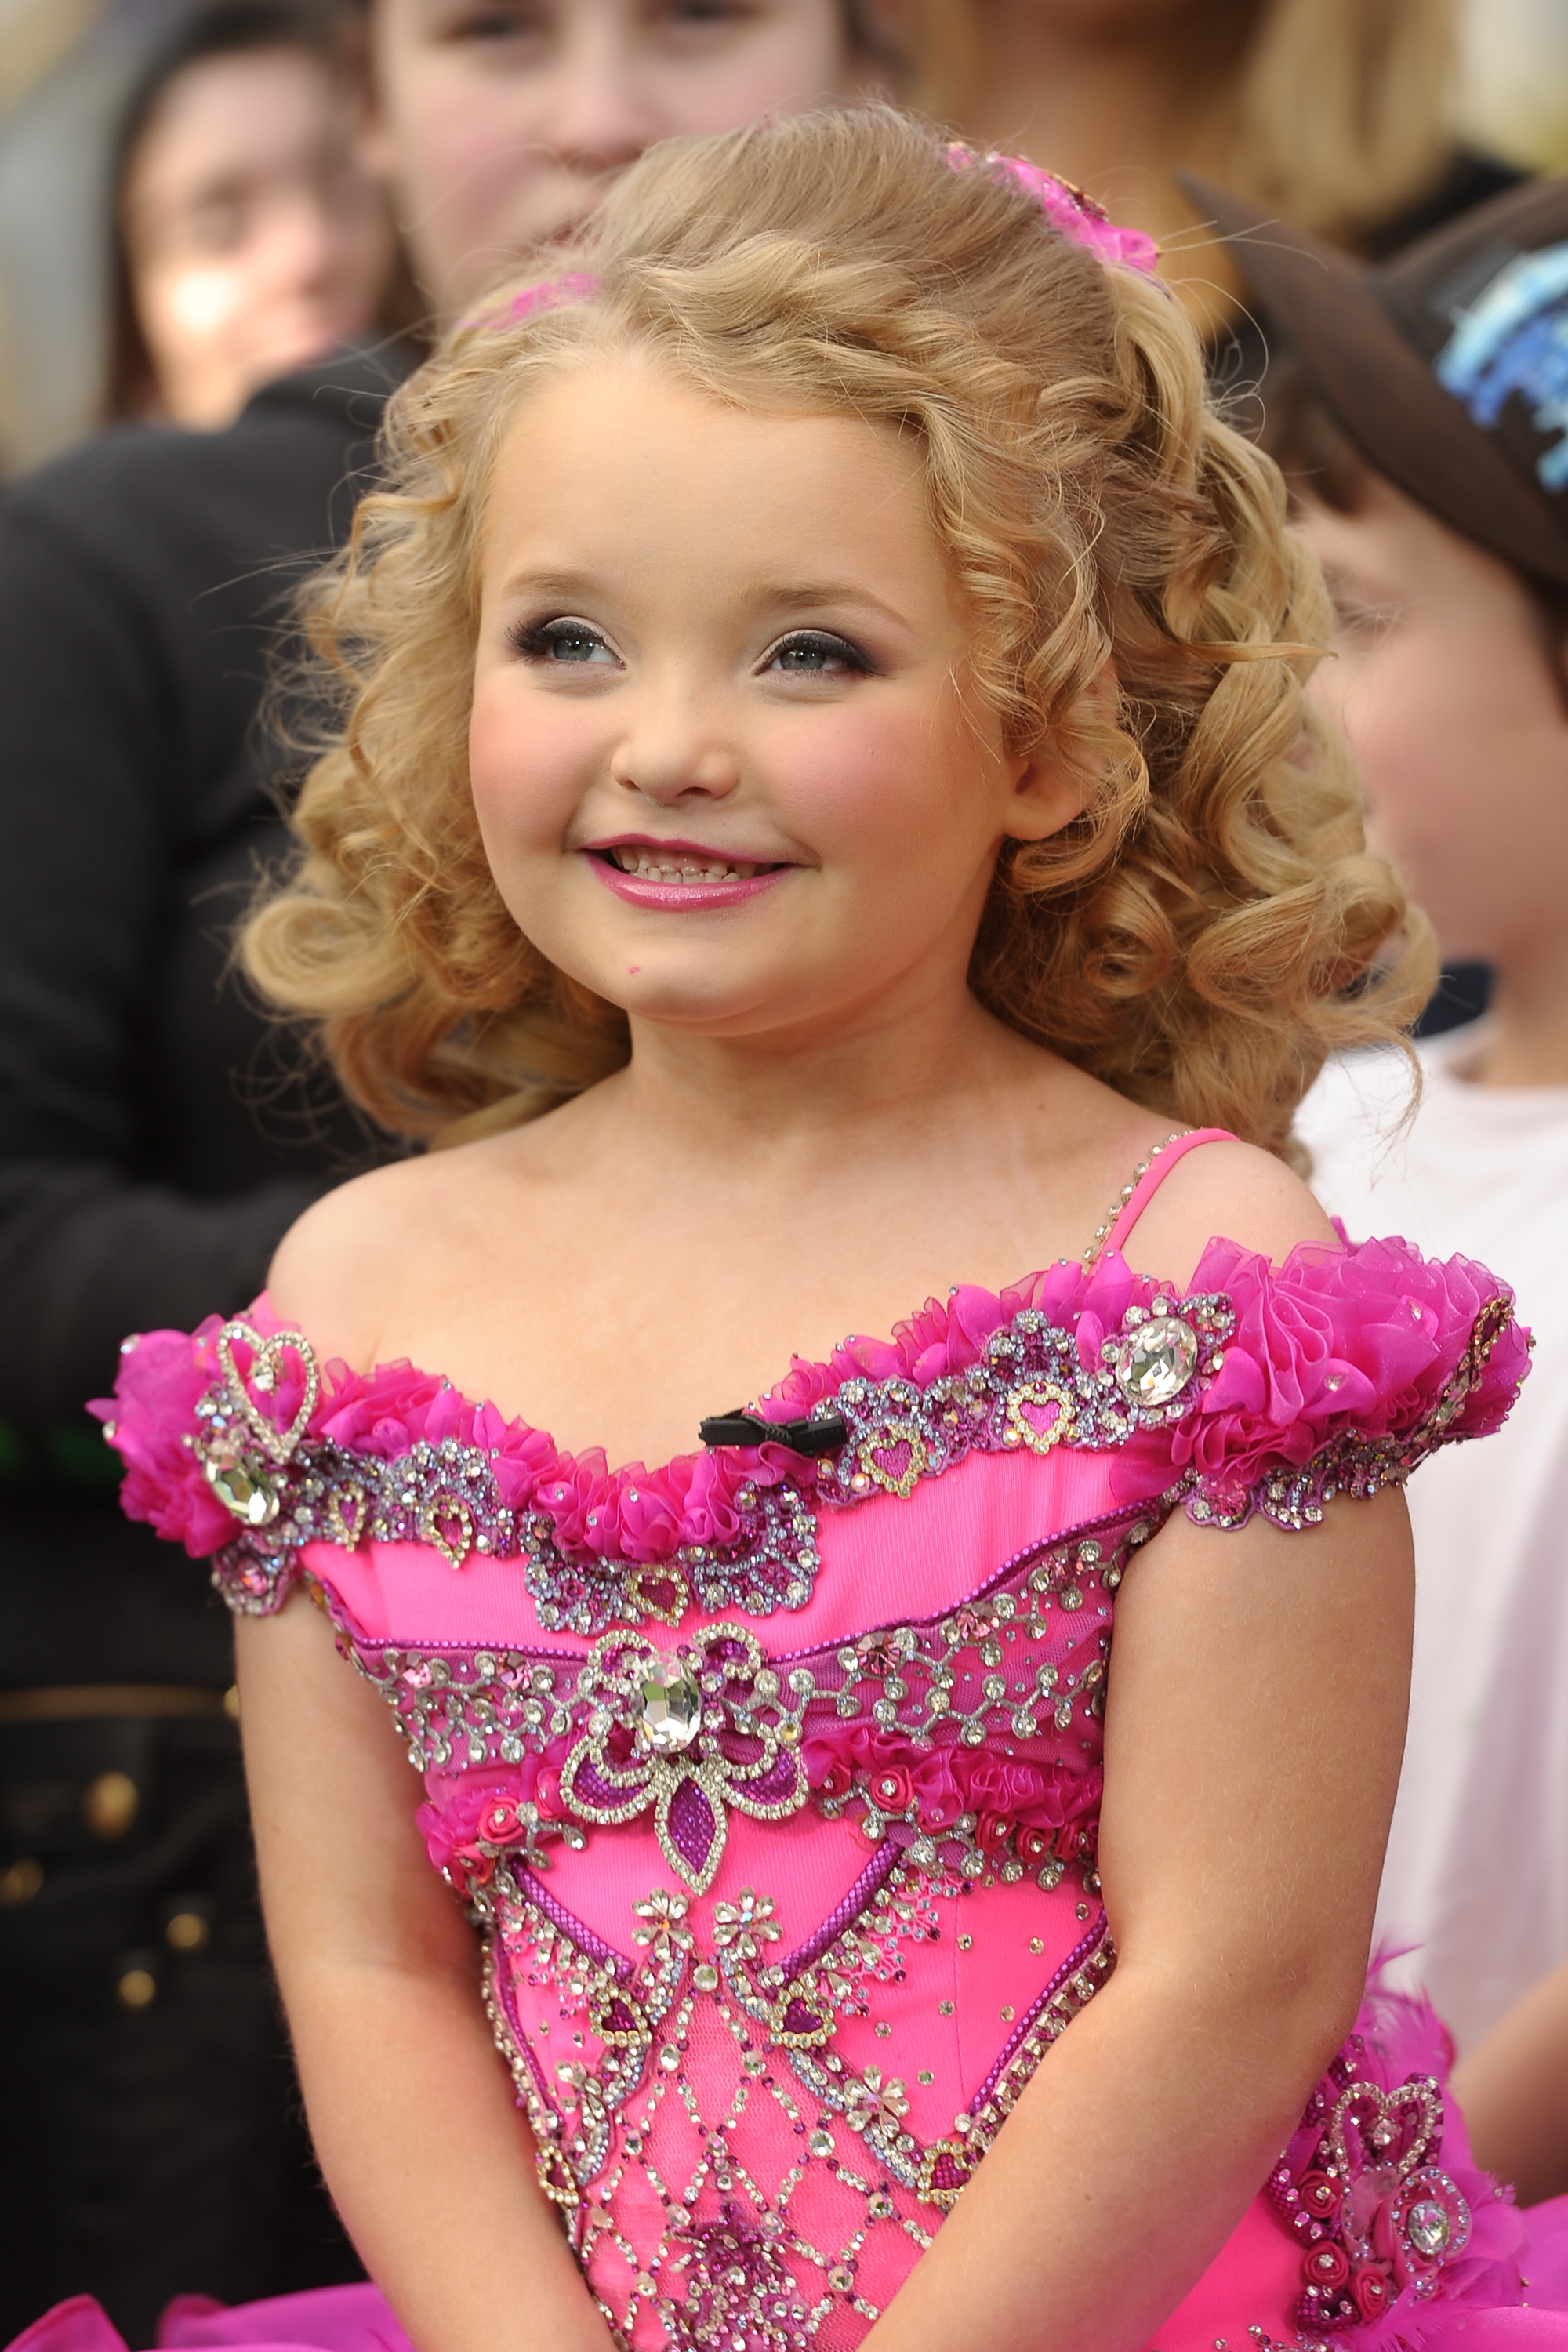 Alana 'Honey Boo Boo' Thompson at "Extra" at The Grove in Los Angeles, 2012 | Source: Getty Images